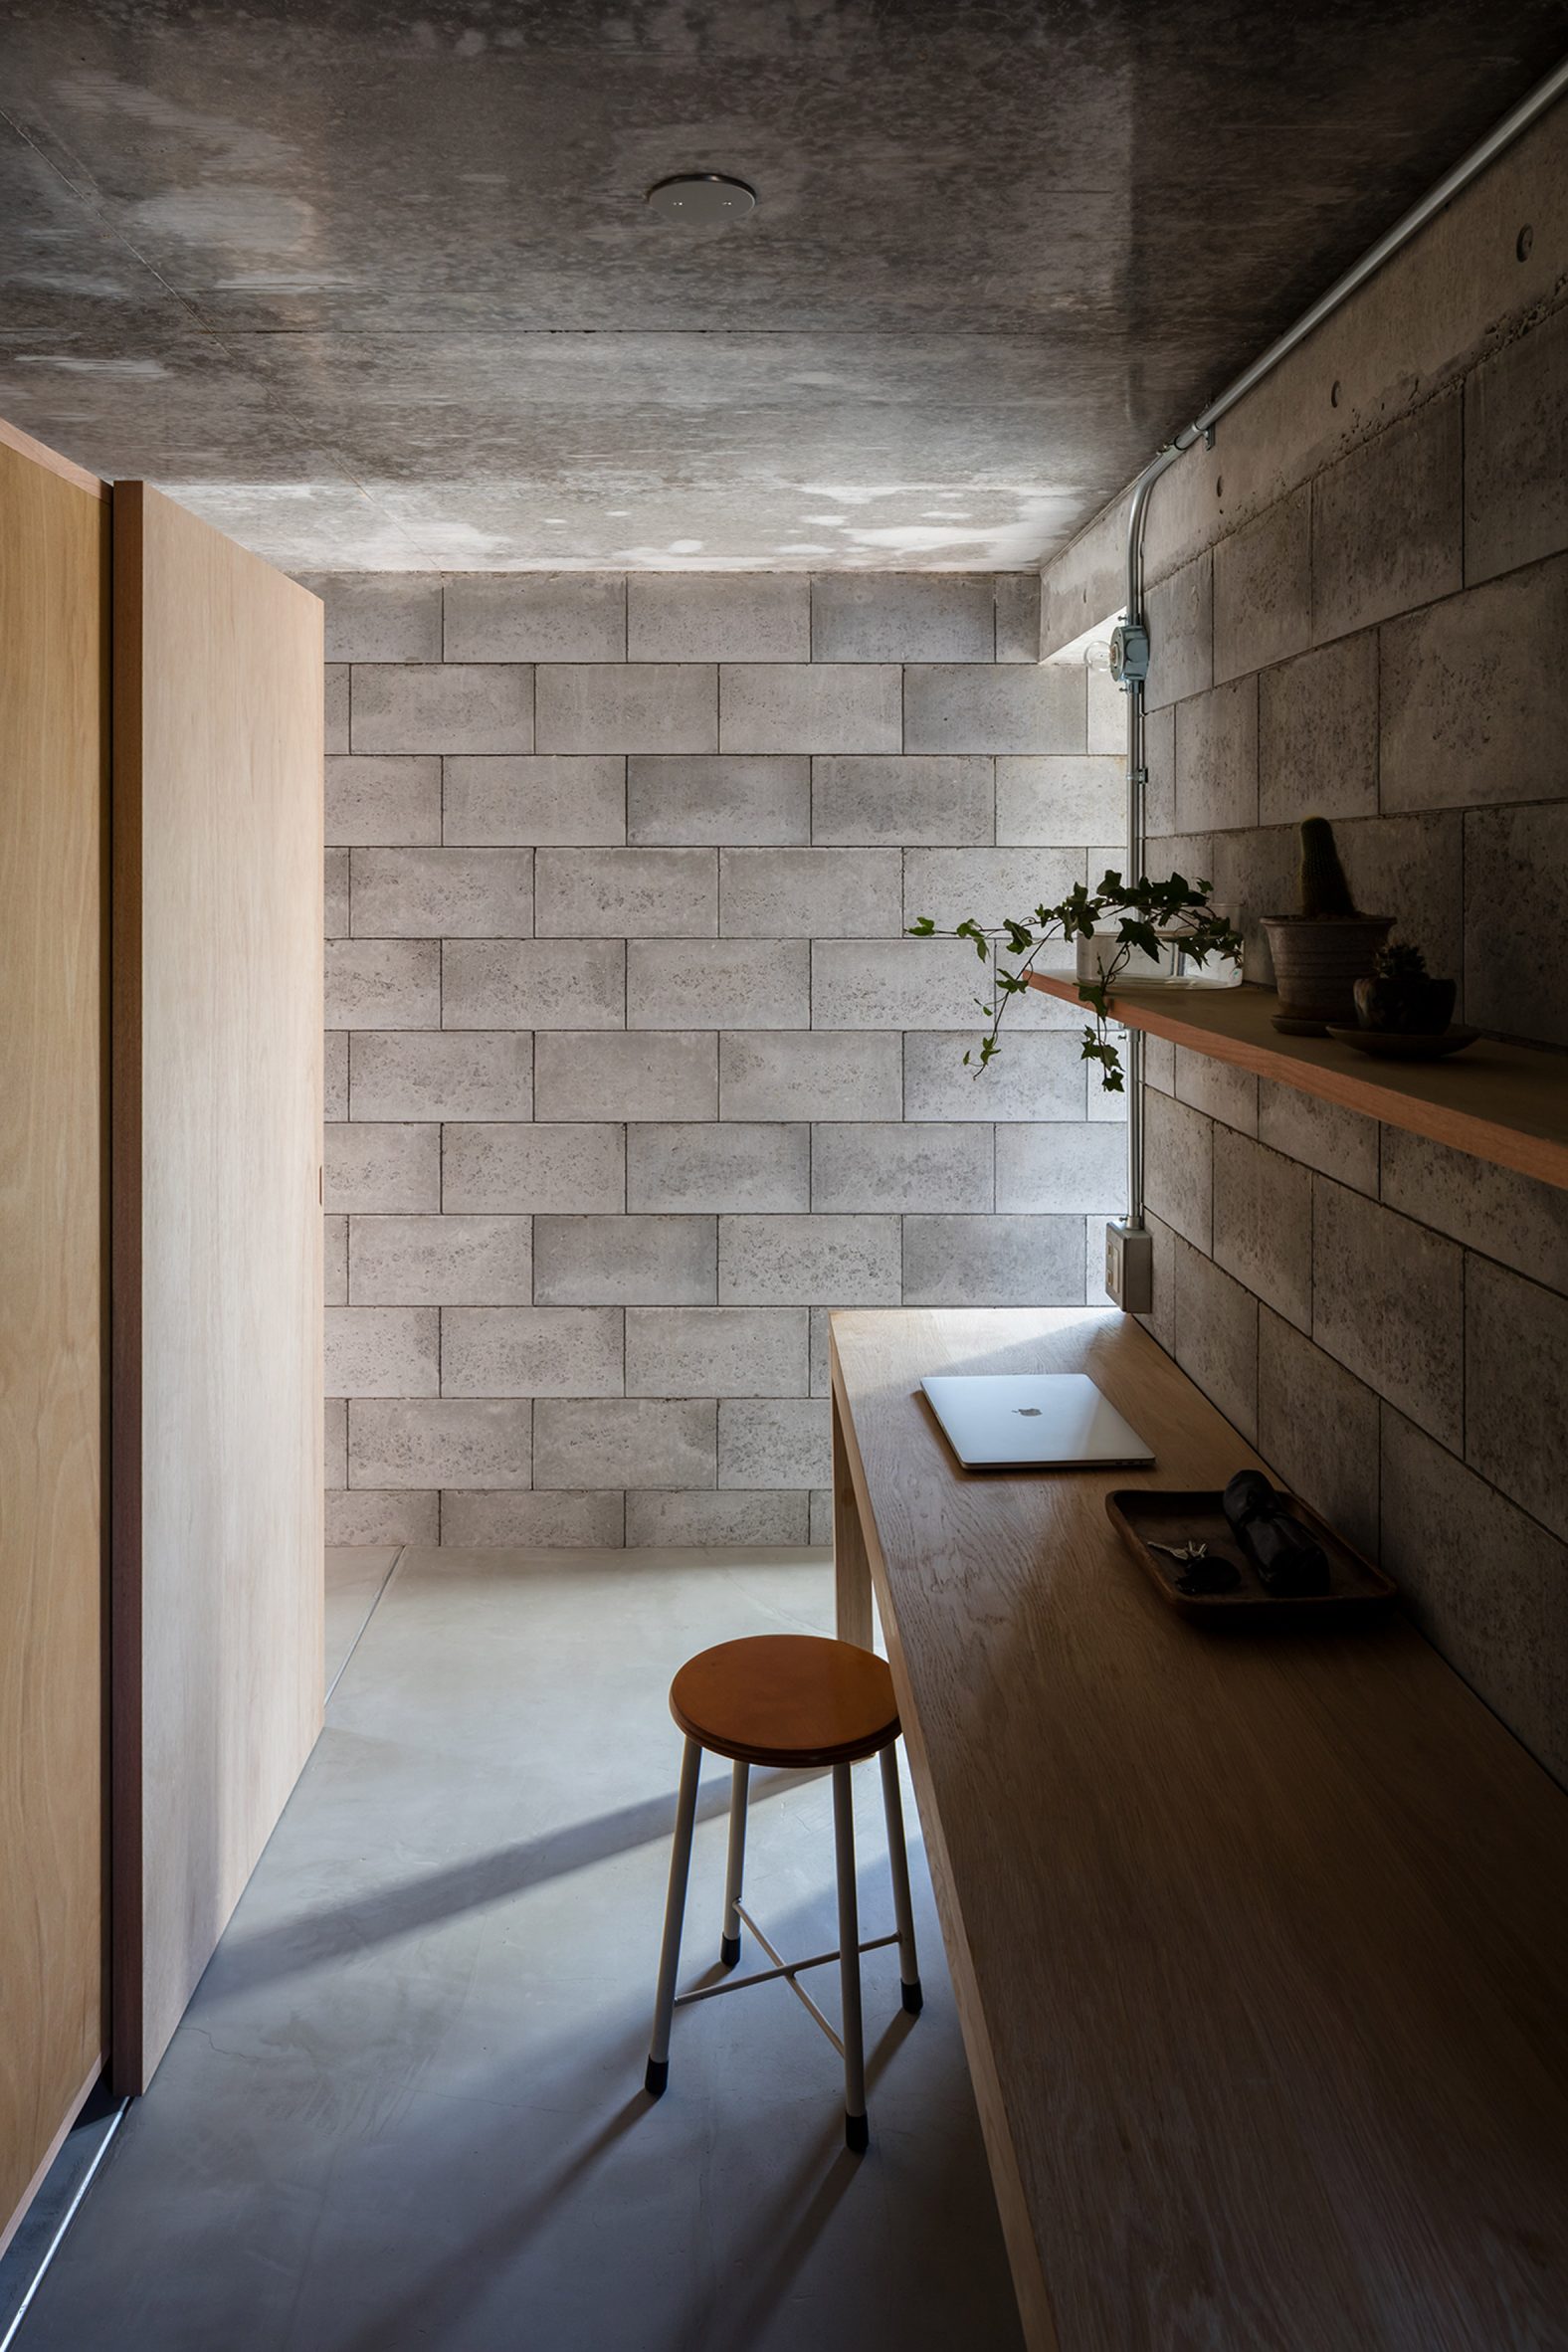 Study lined with exposed concrete blocks